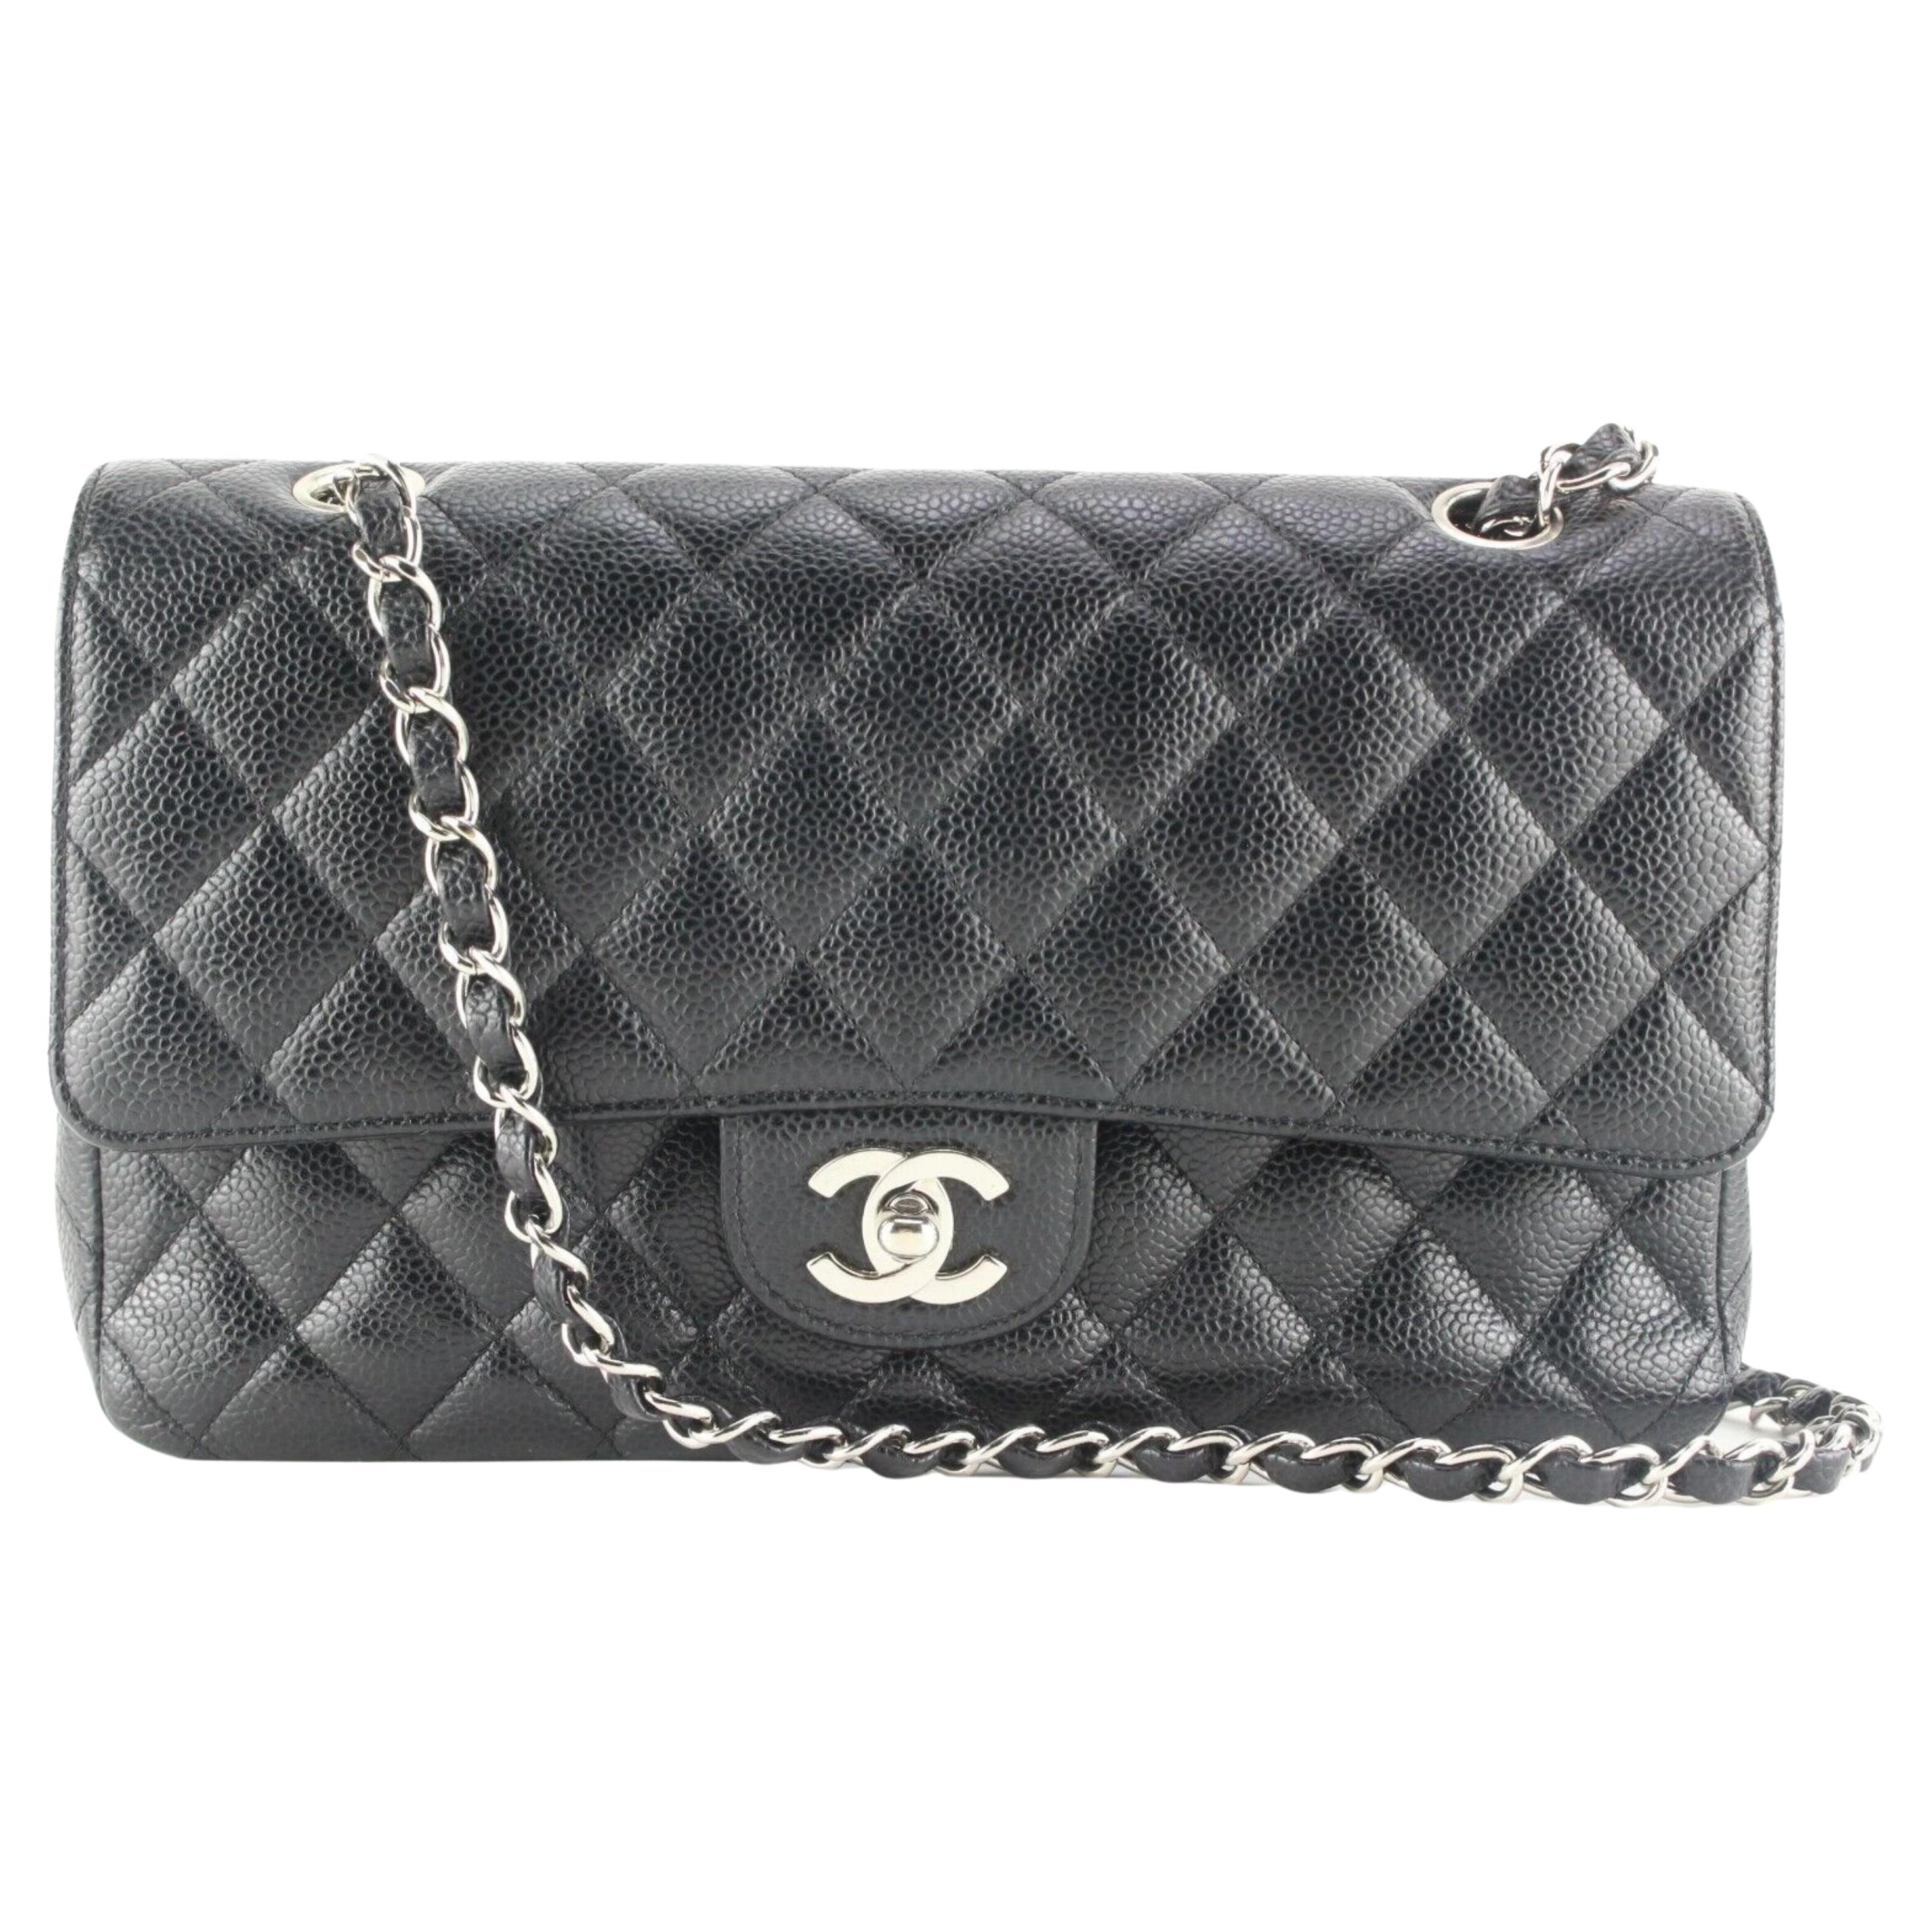 Chanel Black Quilted Caviar Leather Medium Classic Double Flap SHW